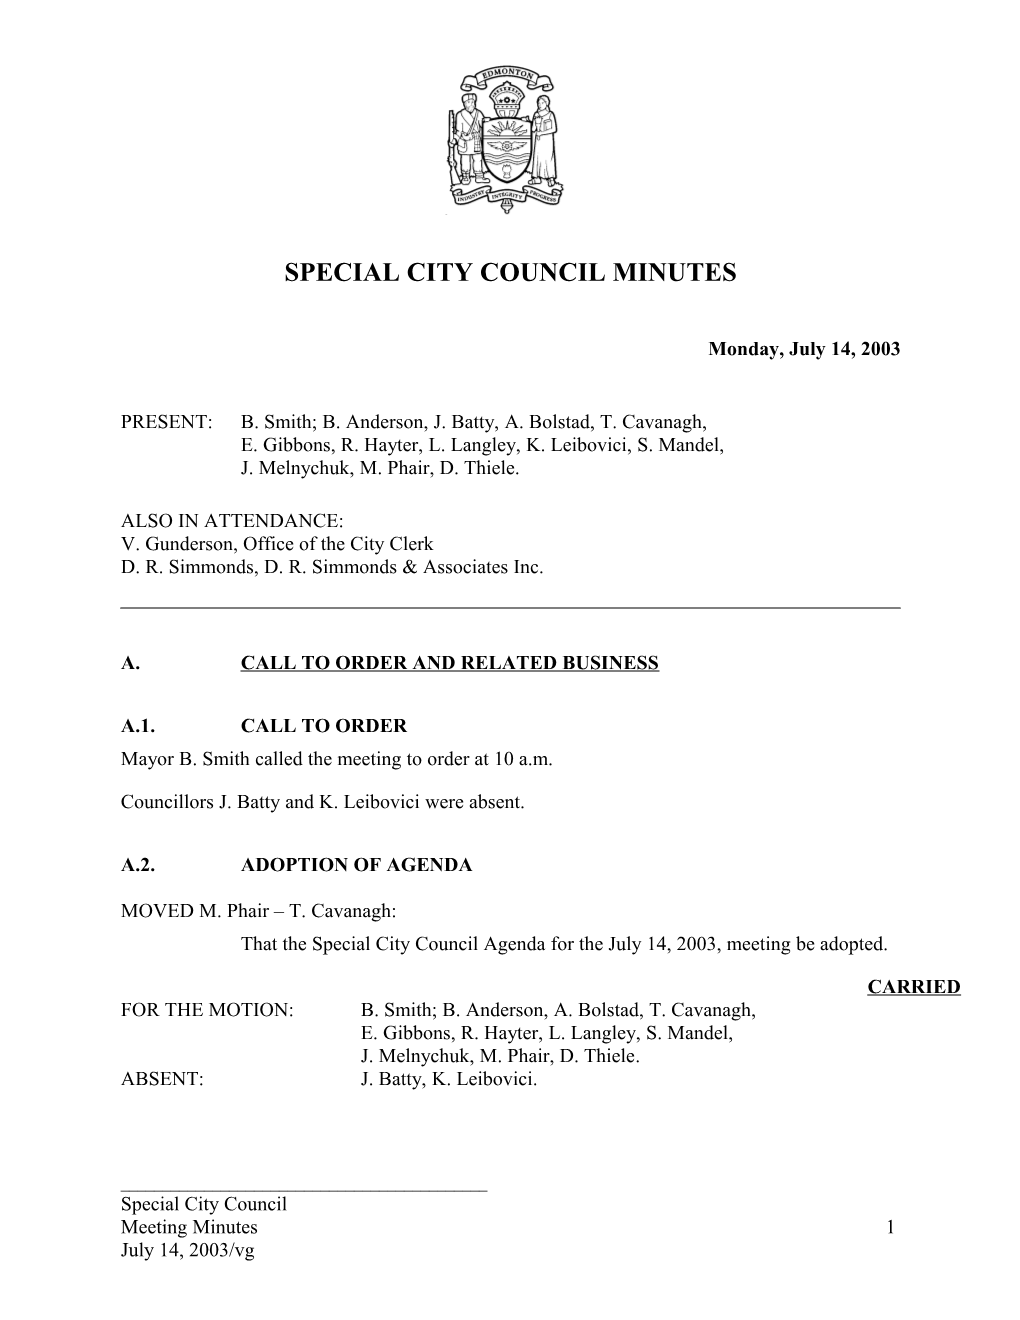 Minutes for City Council July 14, 2003 Meeting